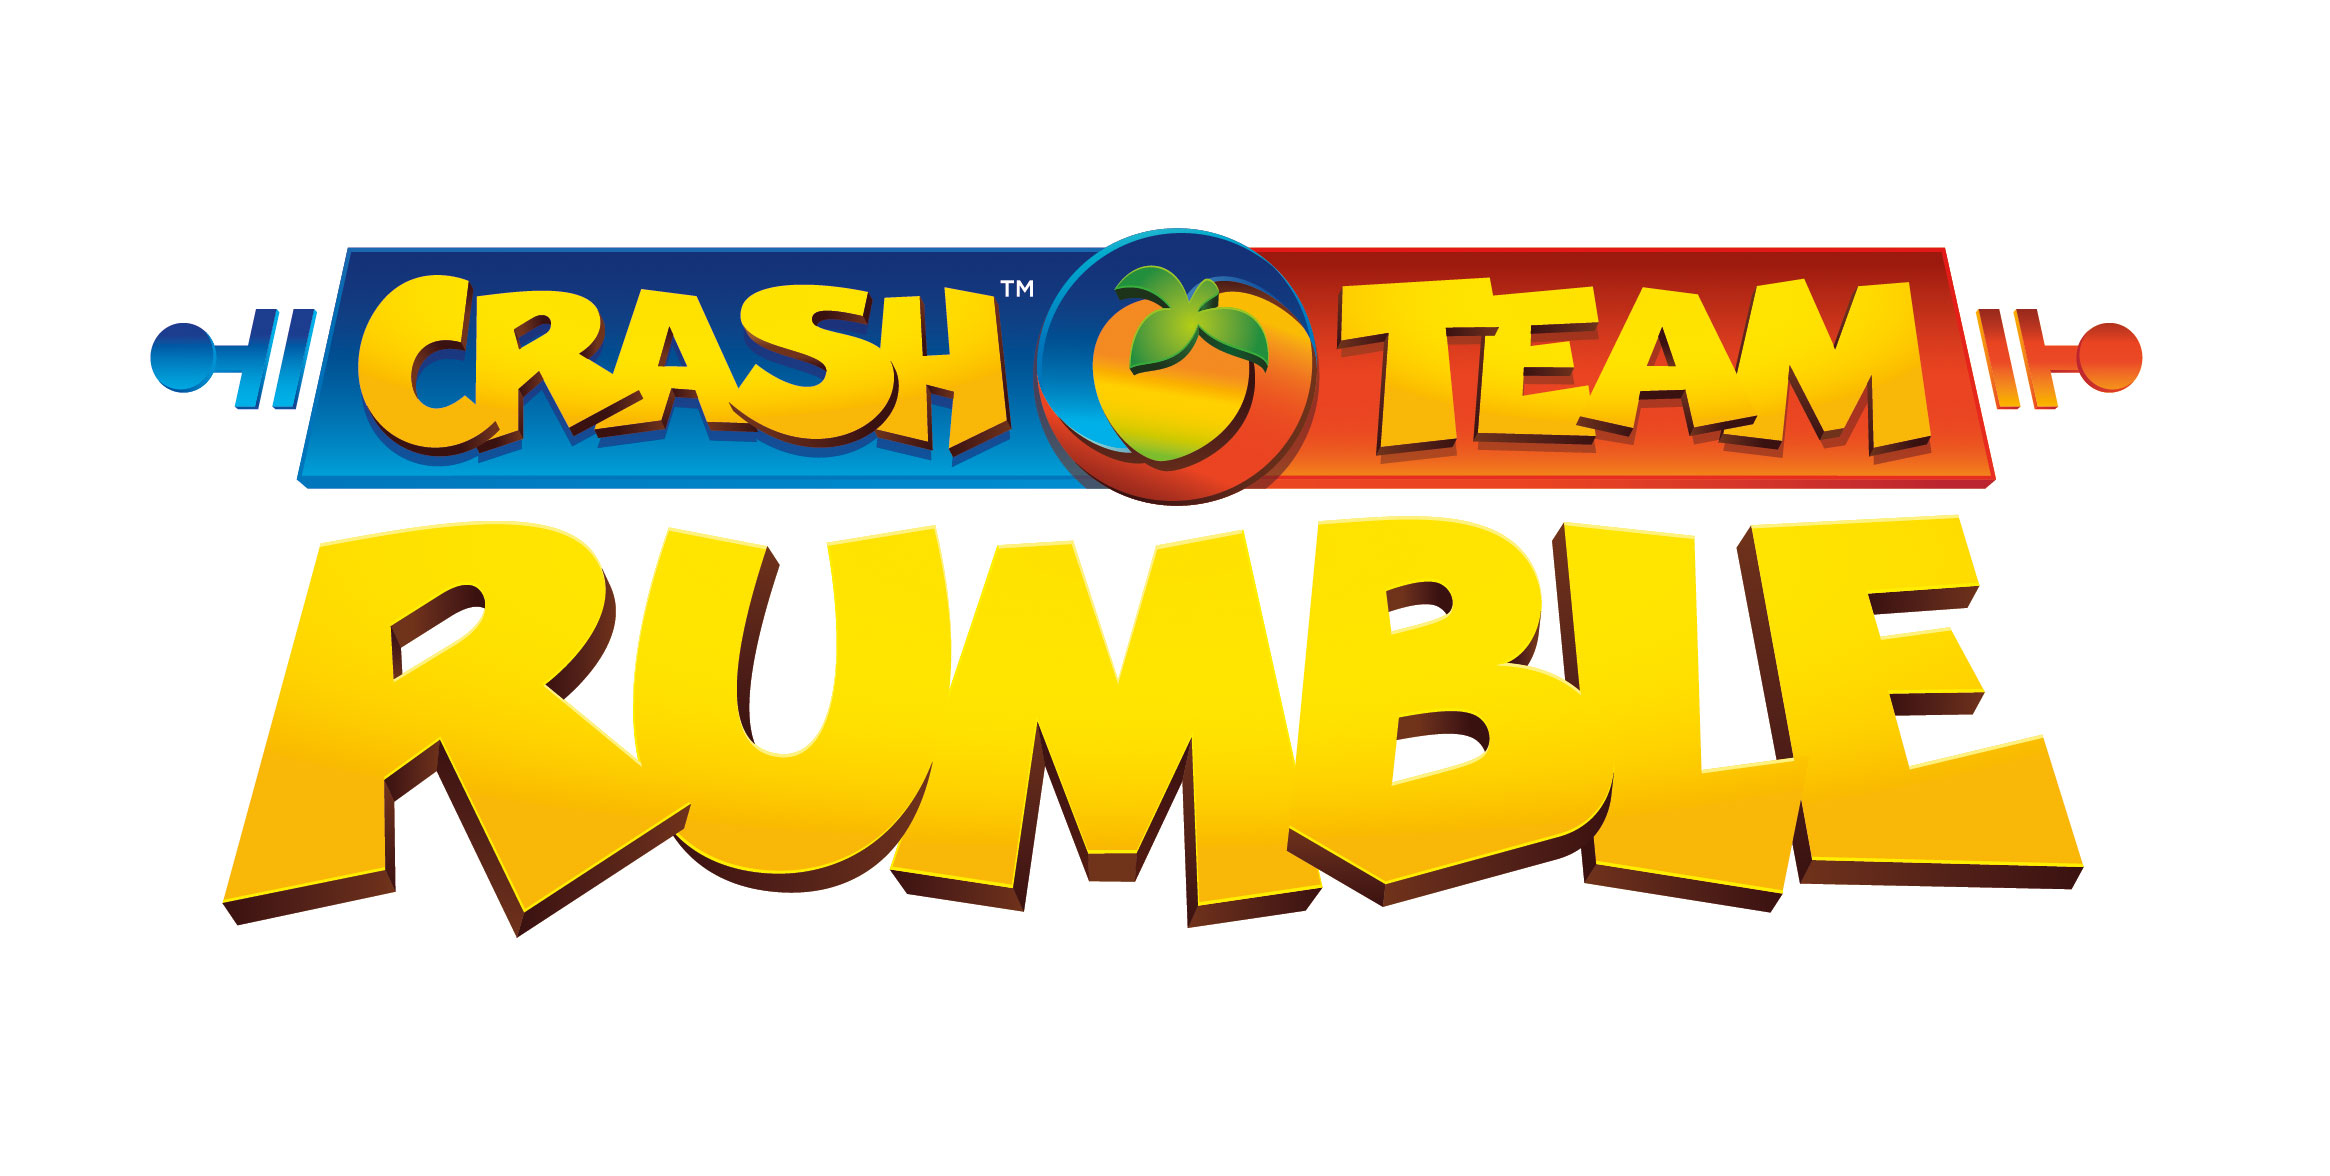 Get Ready for an and Sane | Now Crash Xbox® Team Available Wire PlayStation® Brawl! for Rumble™ N. Business